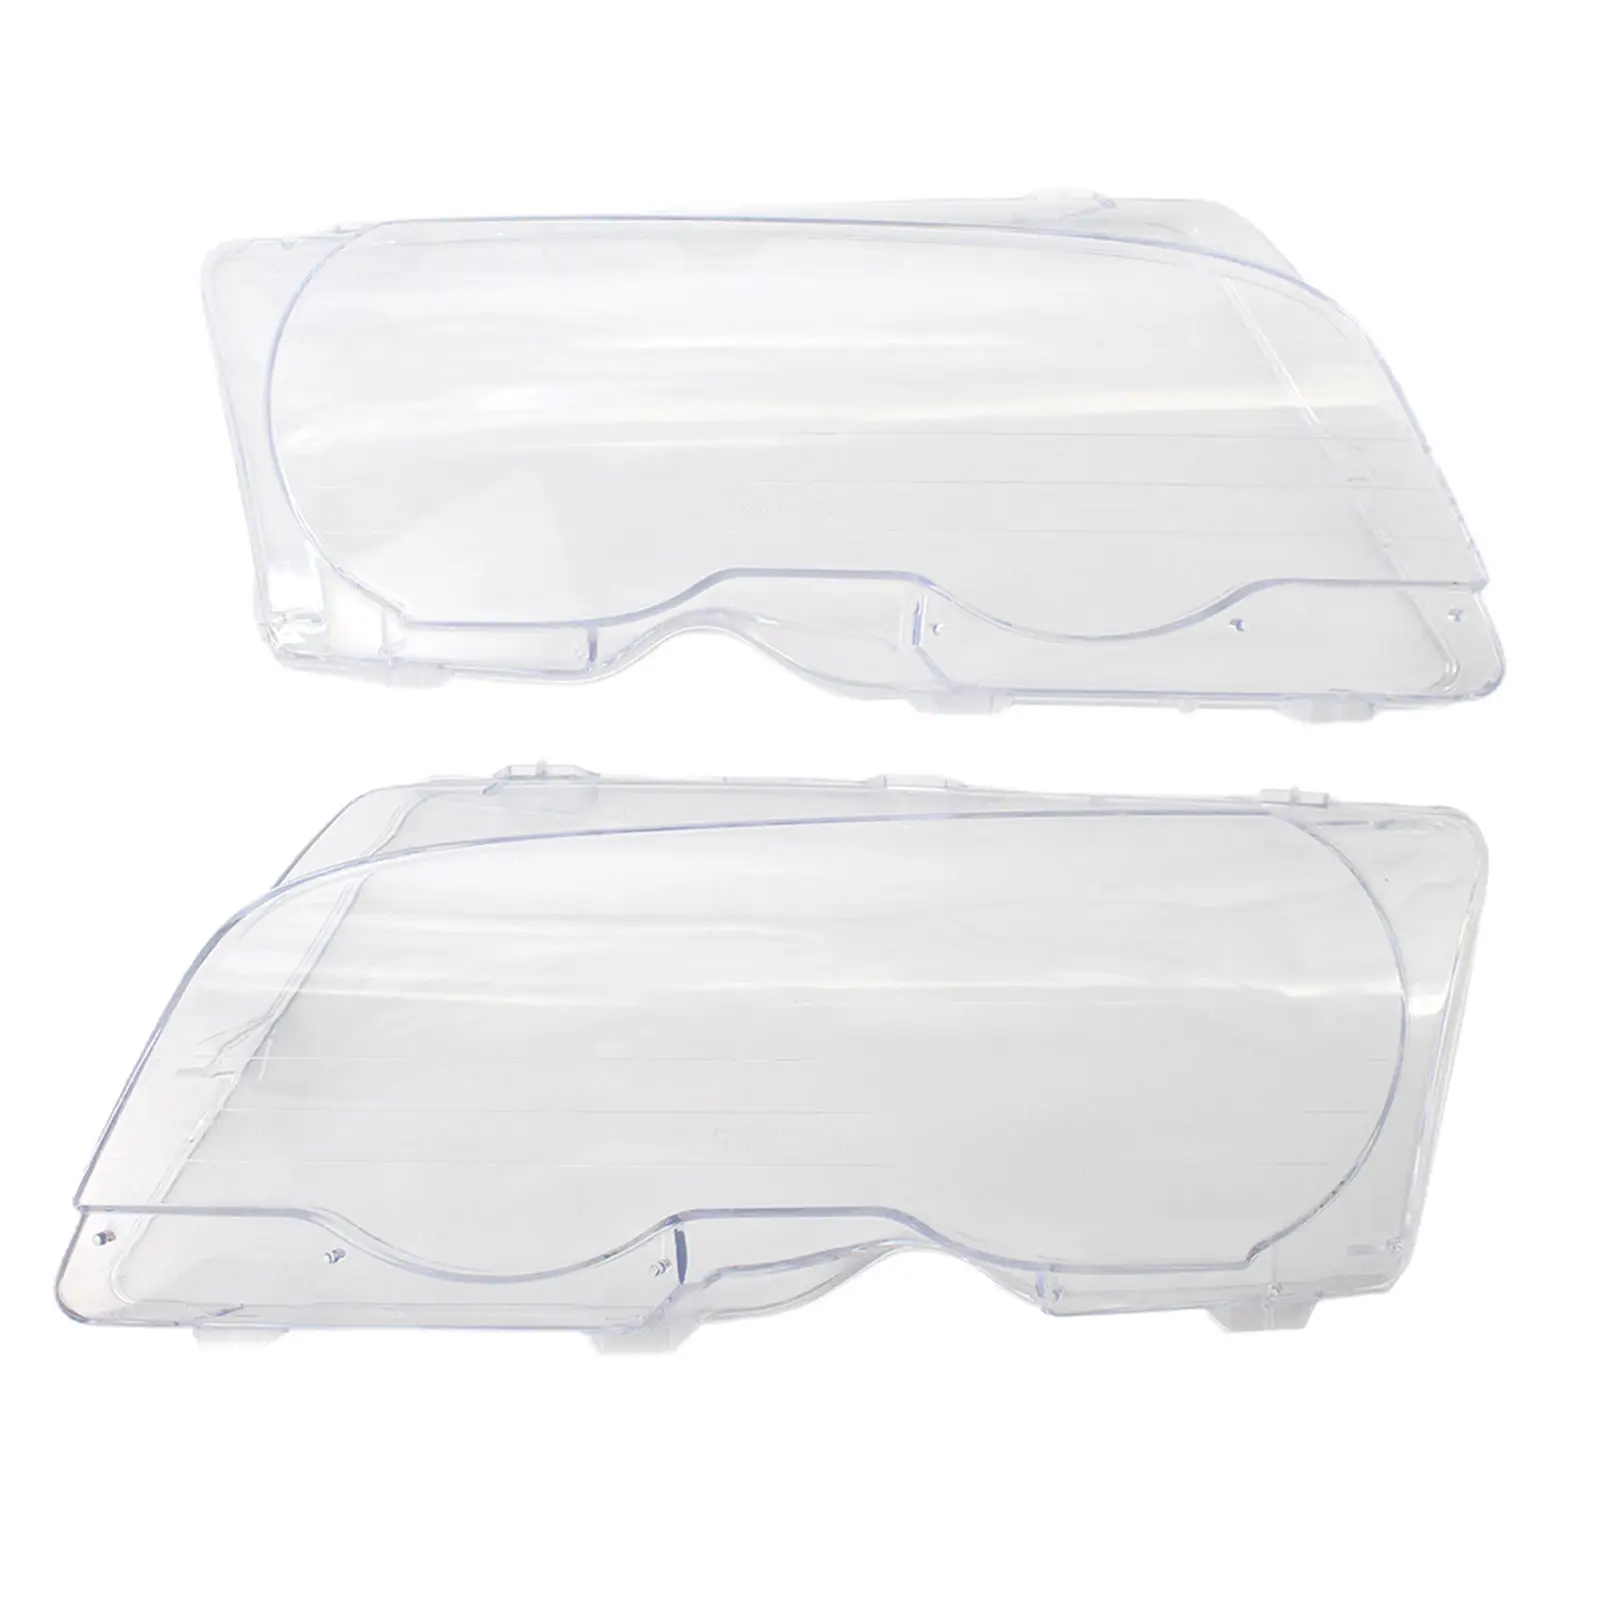 Left & Right Headlight Lens Cover fits for BMW 3 E46 2-Door 1999 2000 2001 2002,Sturdy and Durable